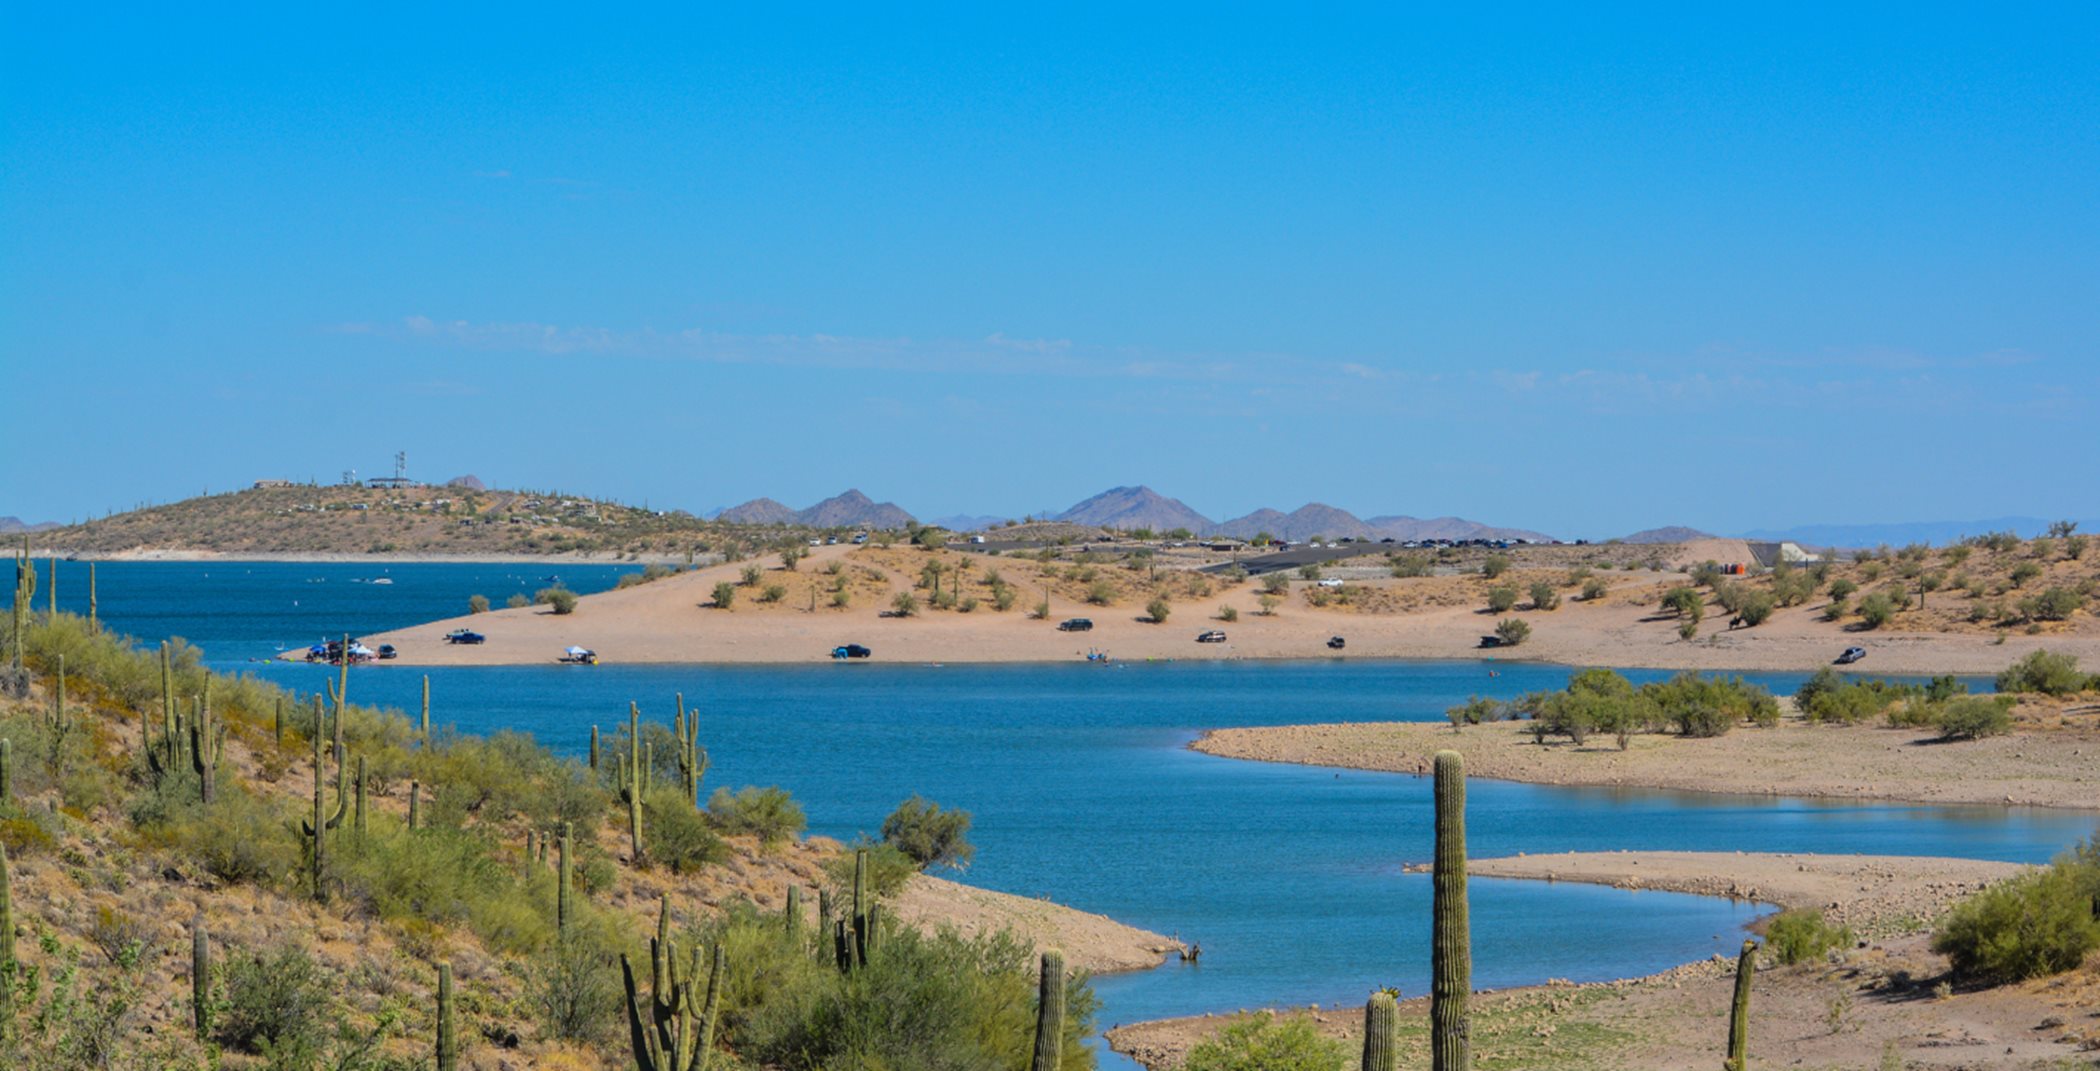 View of lake pleasant and the desert landscape